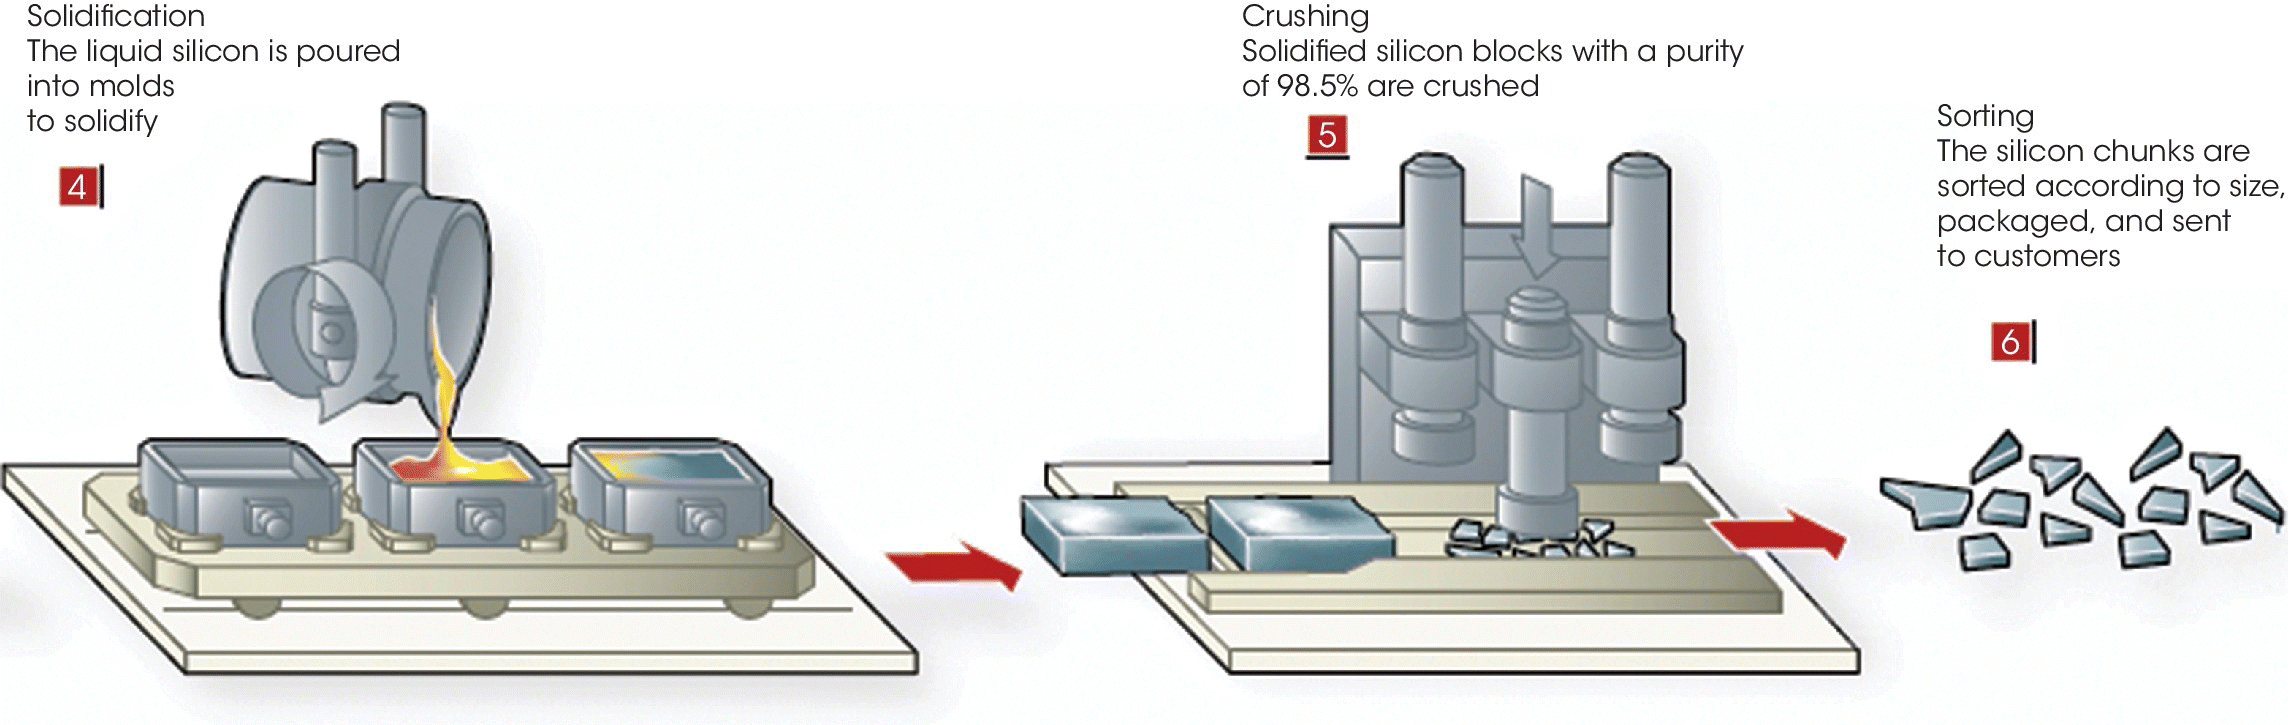 Illustration of the subsequent steps in manufacturing metallurgical silicon using an electric arc reduction furnace, from solidification (4) to crushing (5), and to sorting (6).